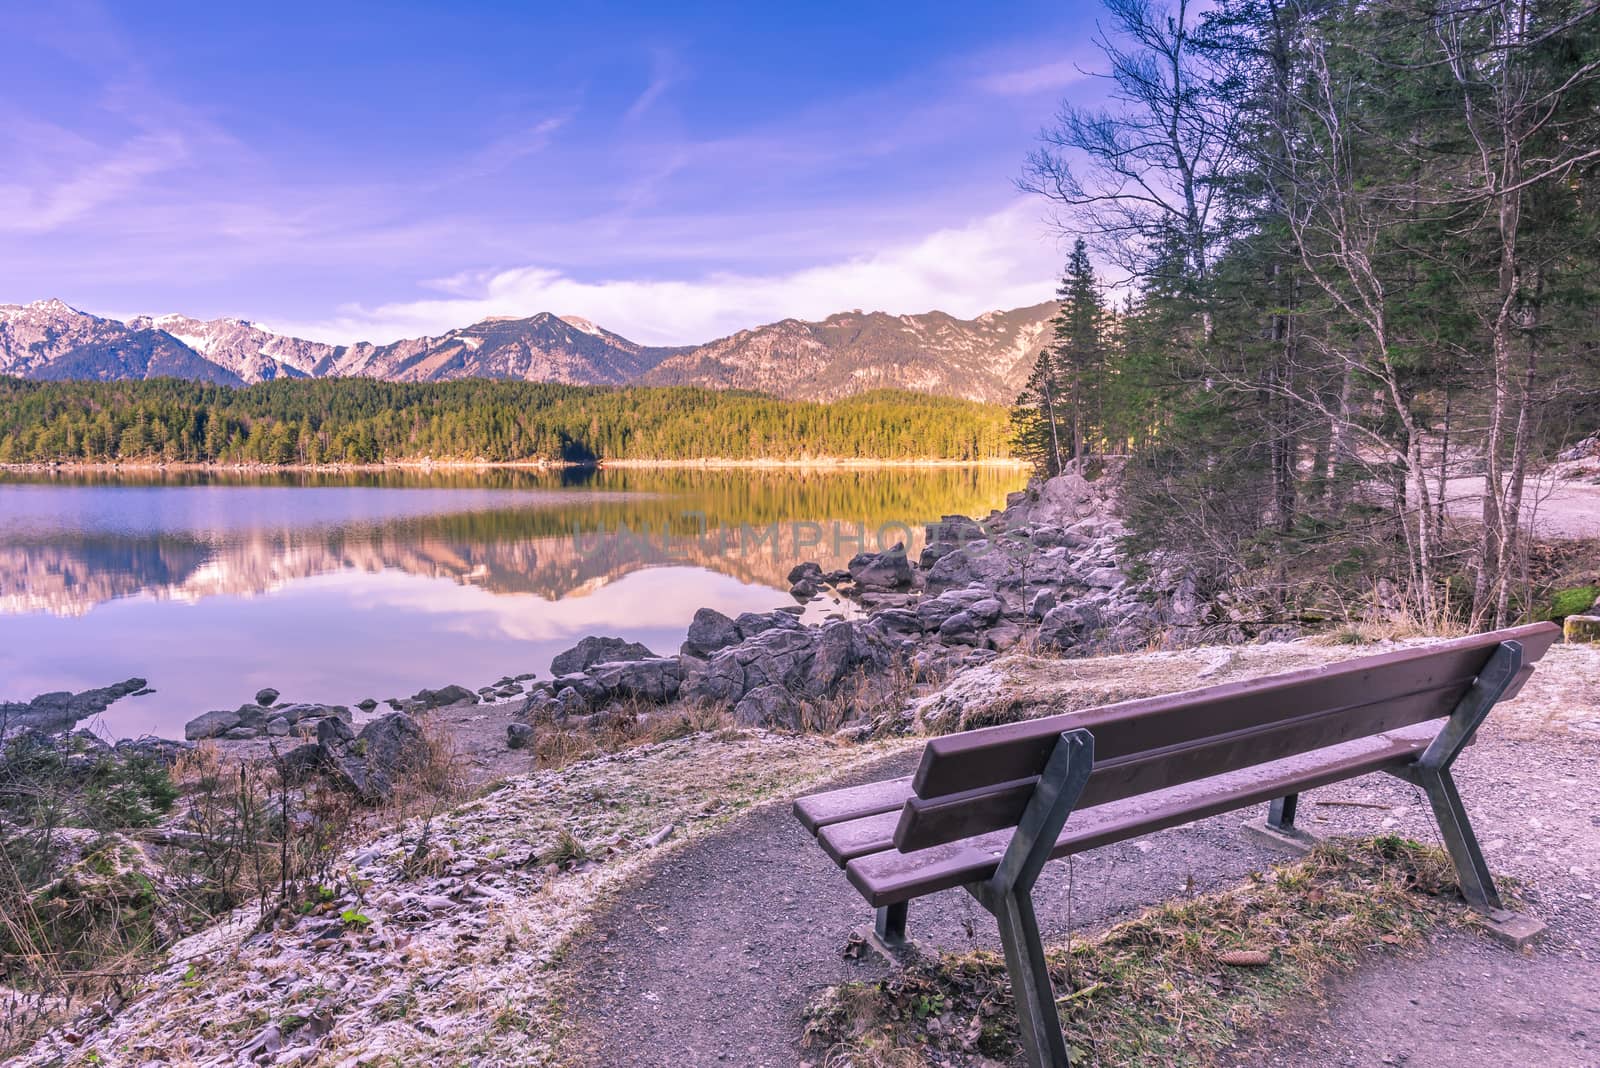 Winter image with a bench located on the shore of the Eibsee lake, from Grainau, Germany. Reflected in its water are the Bavarian Alps mountains.